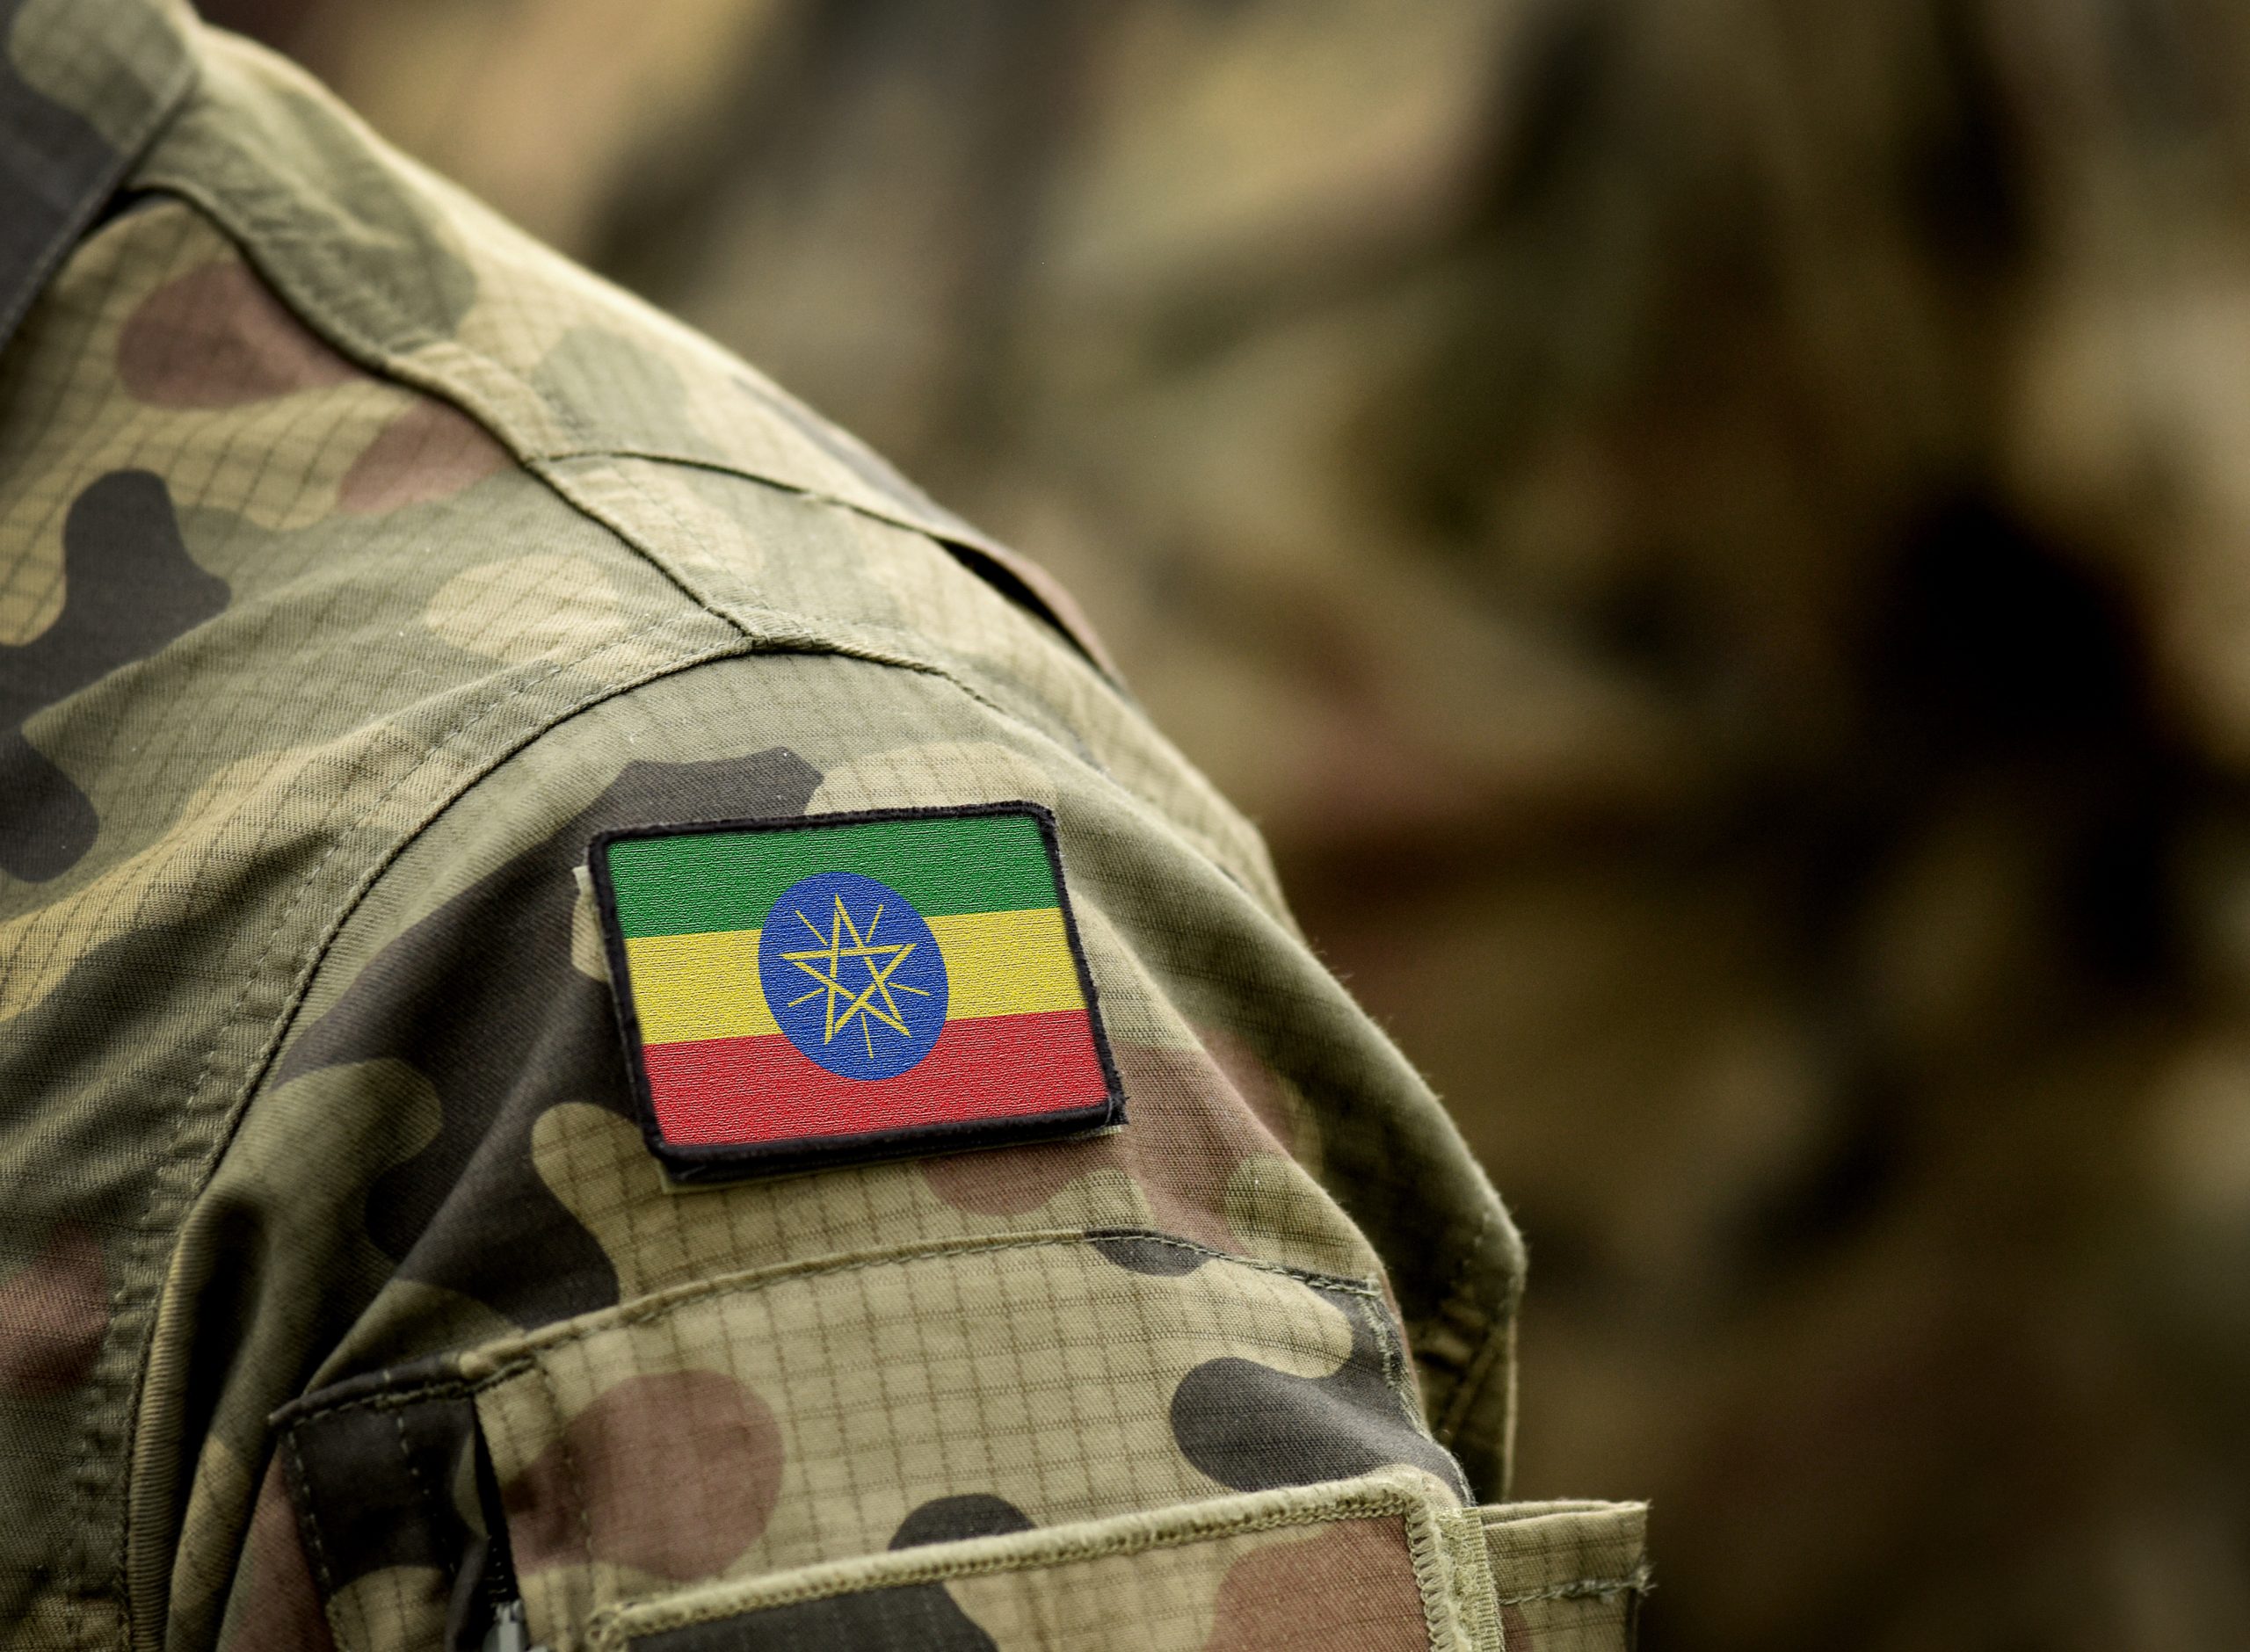 Shoulder of a person in camouflage, with an Ethiopian flag patch.